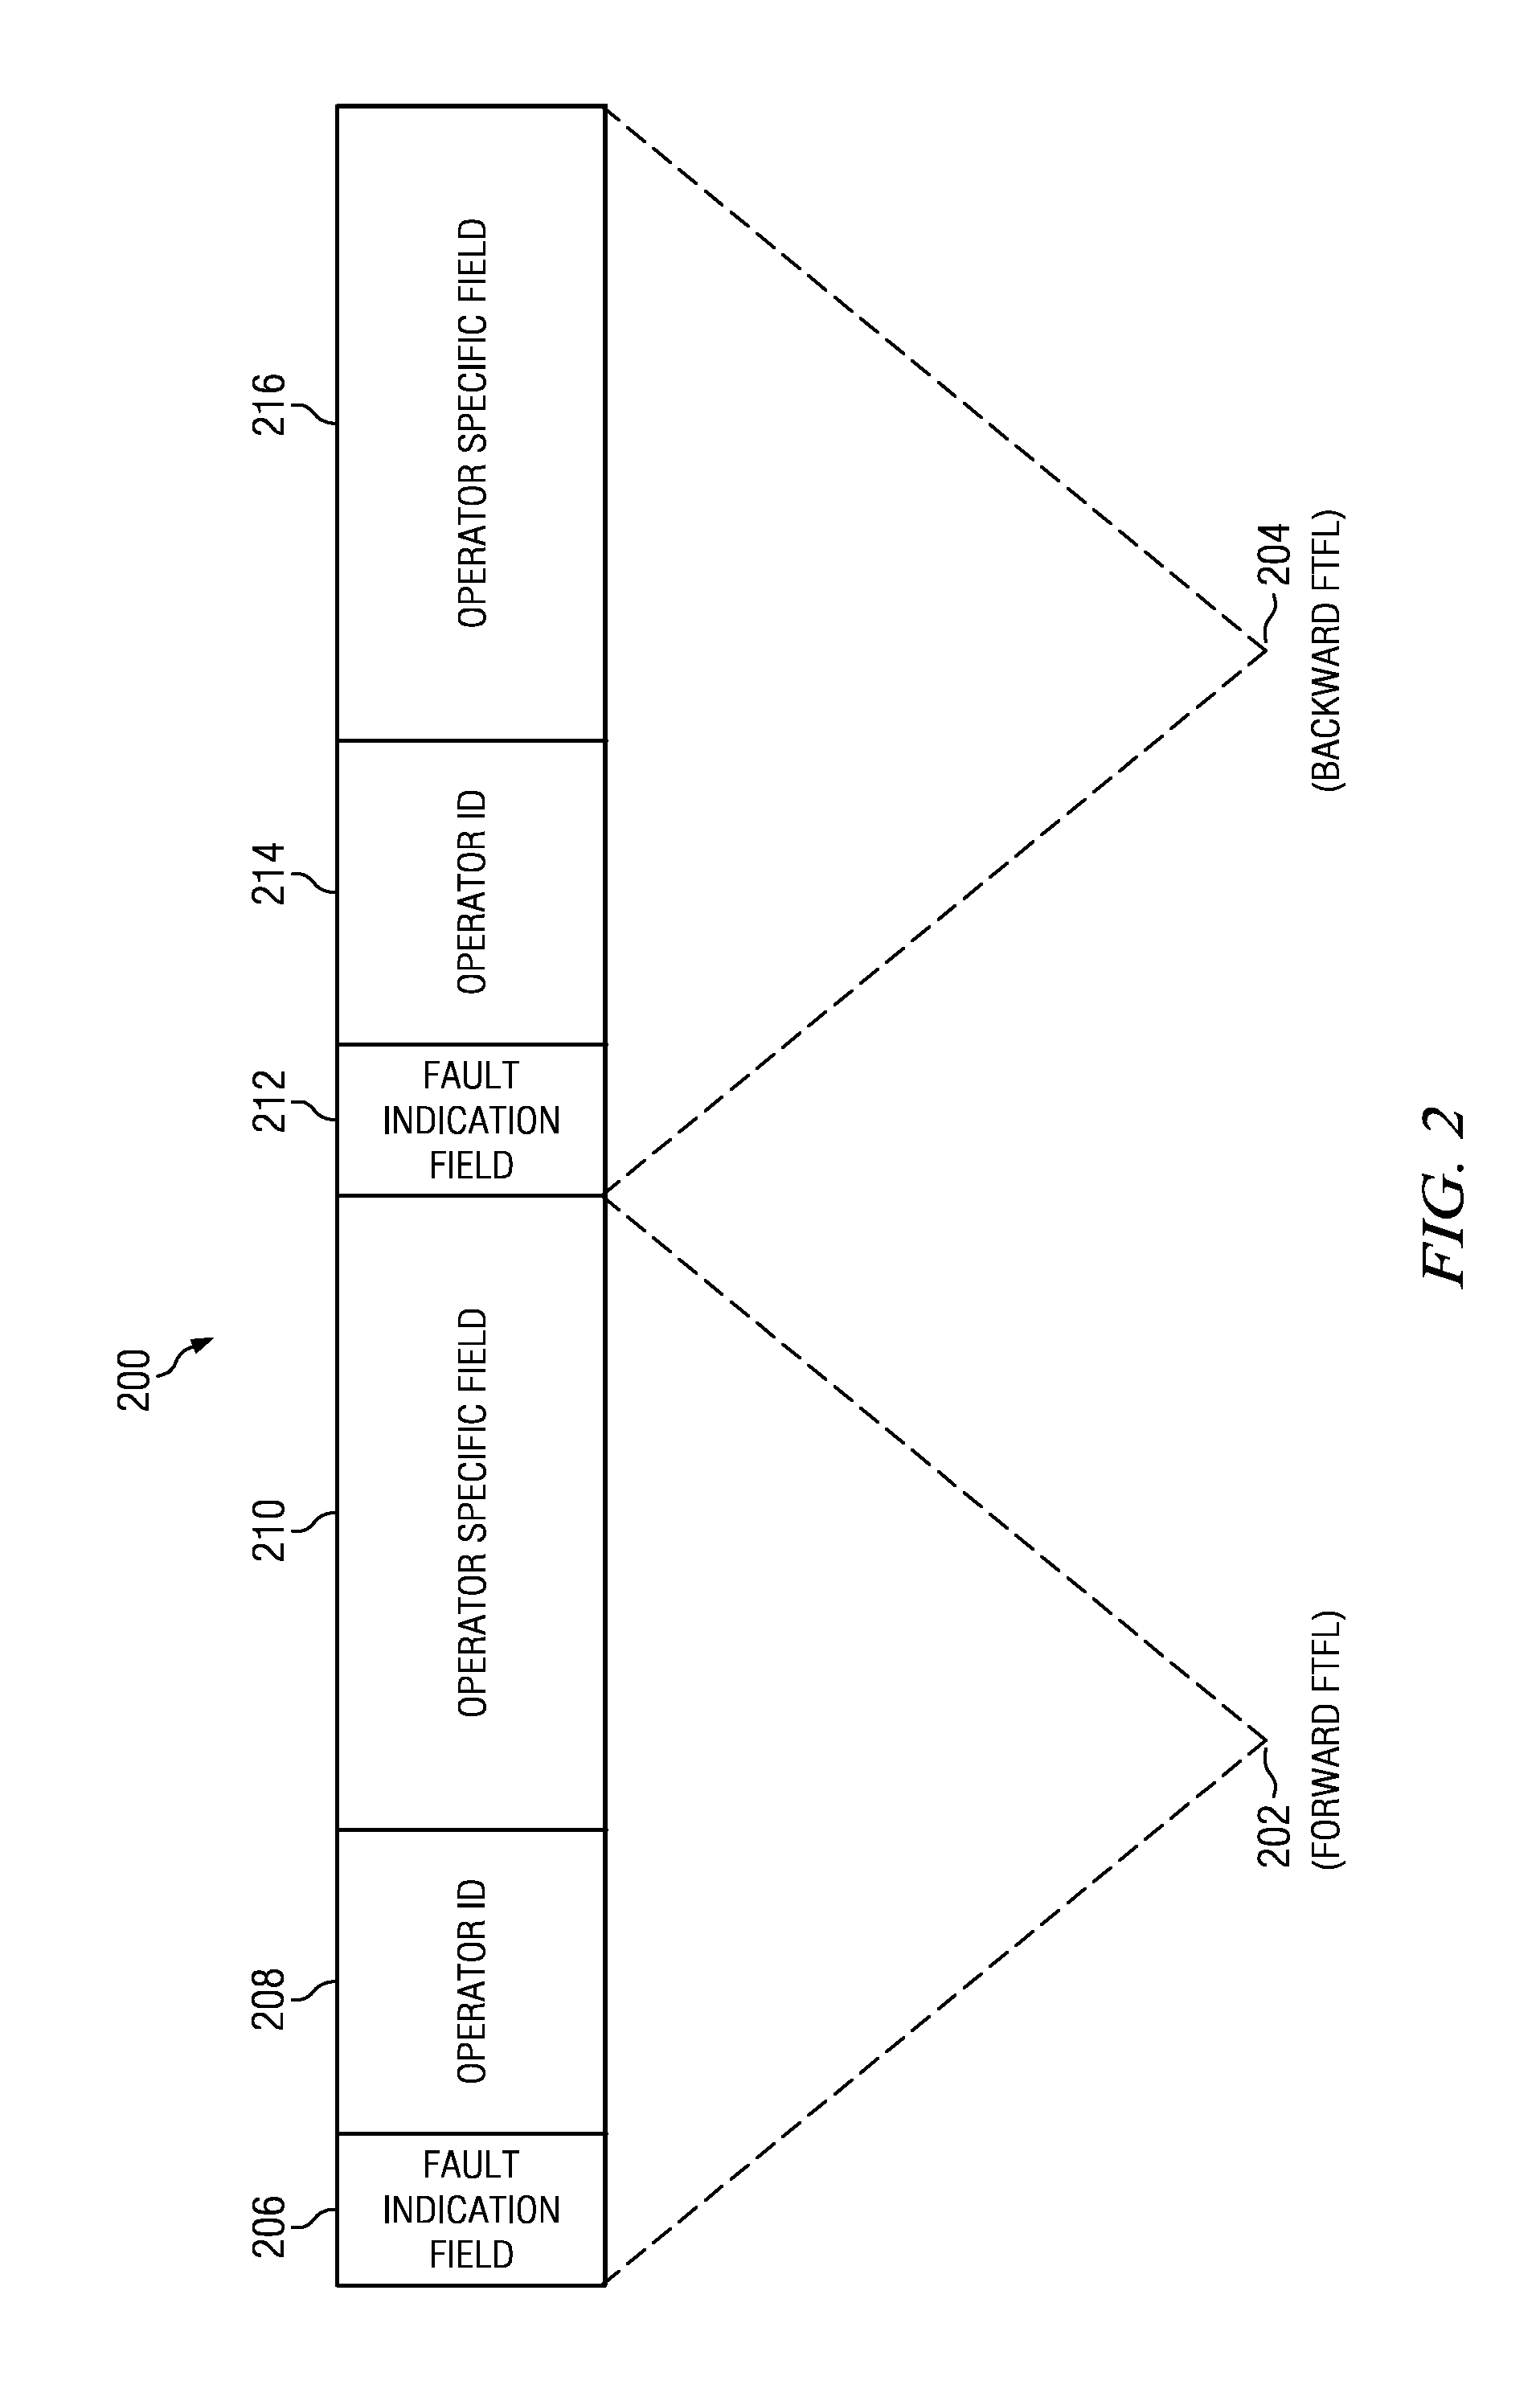 Triggers to Fault Information Insertion in Optical Transport Network